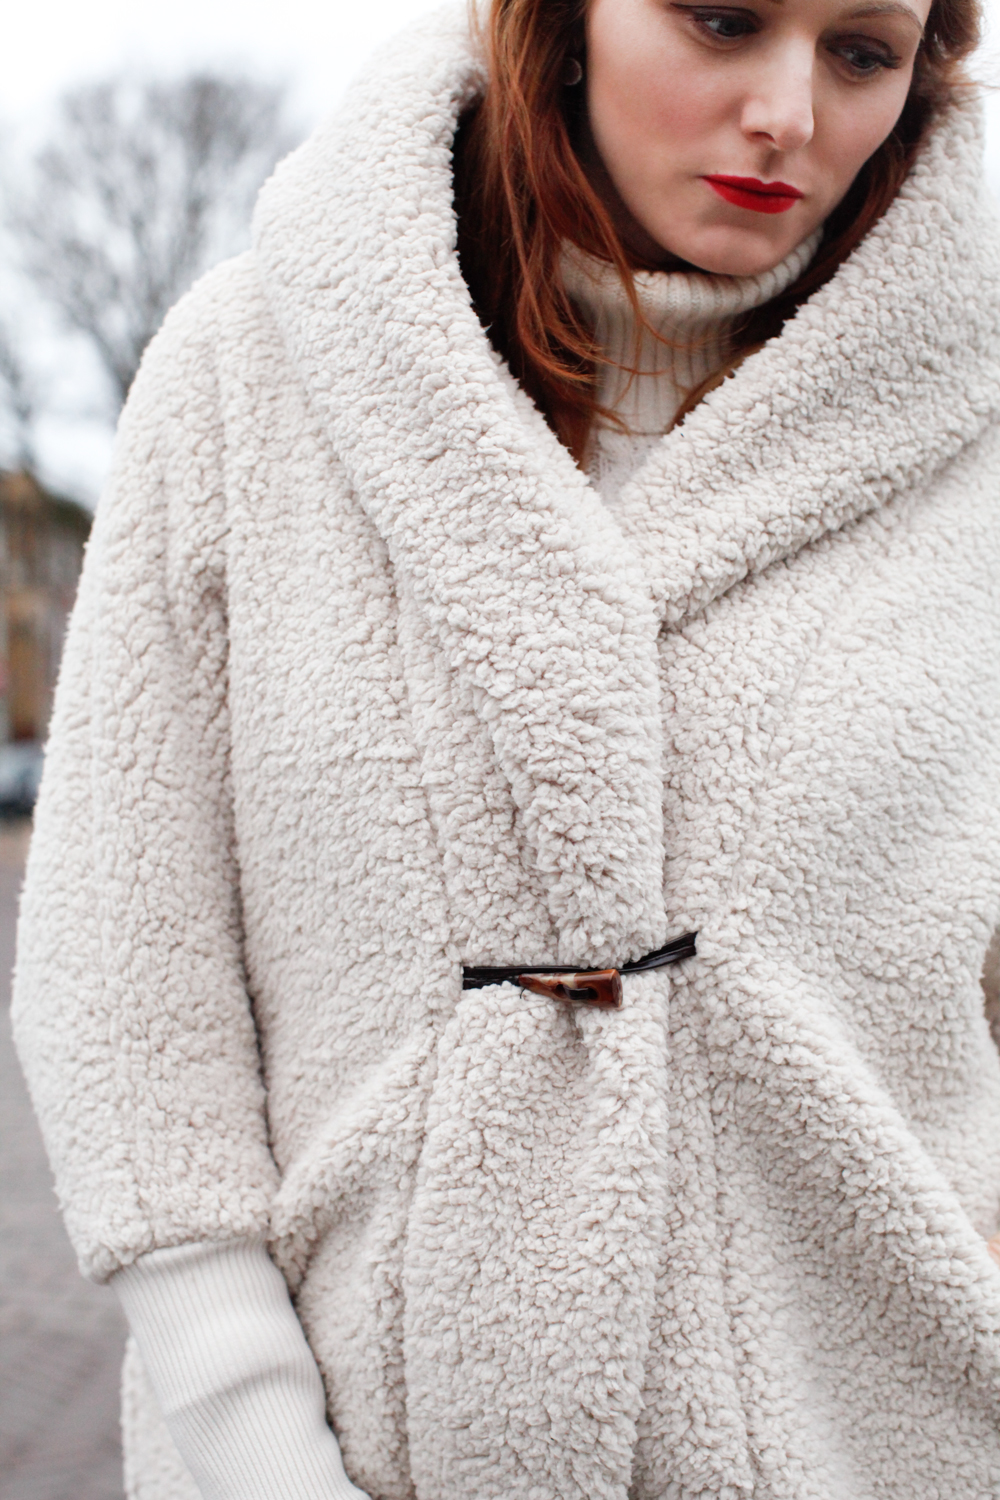 Fluffy coat to keep you warm